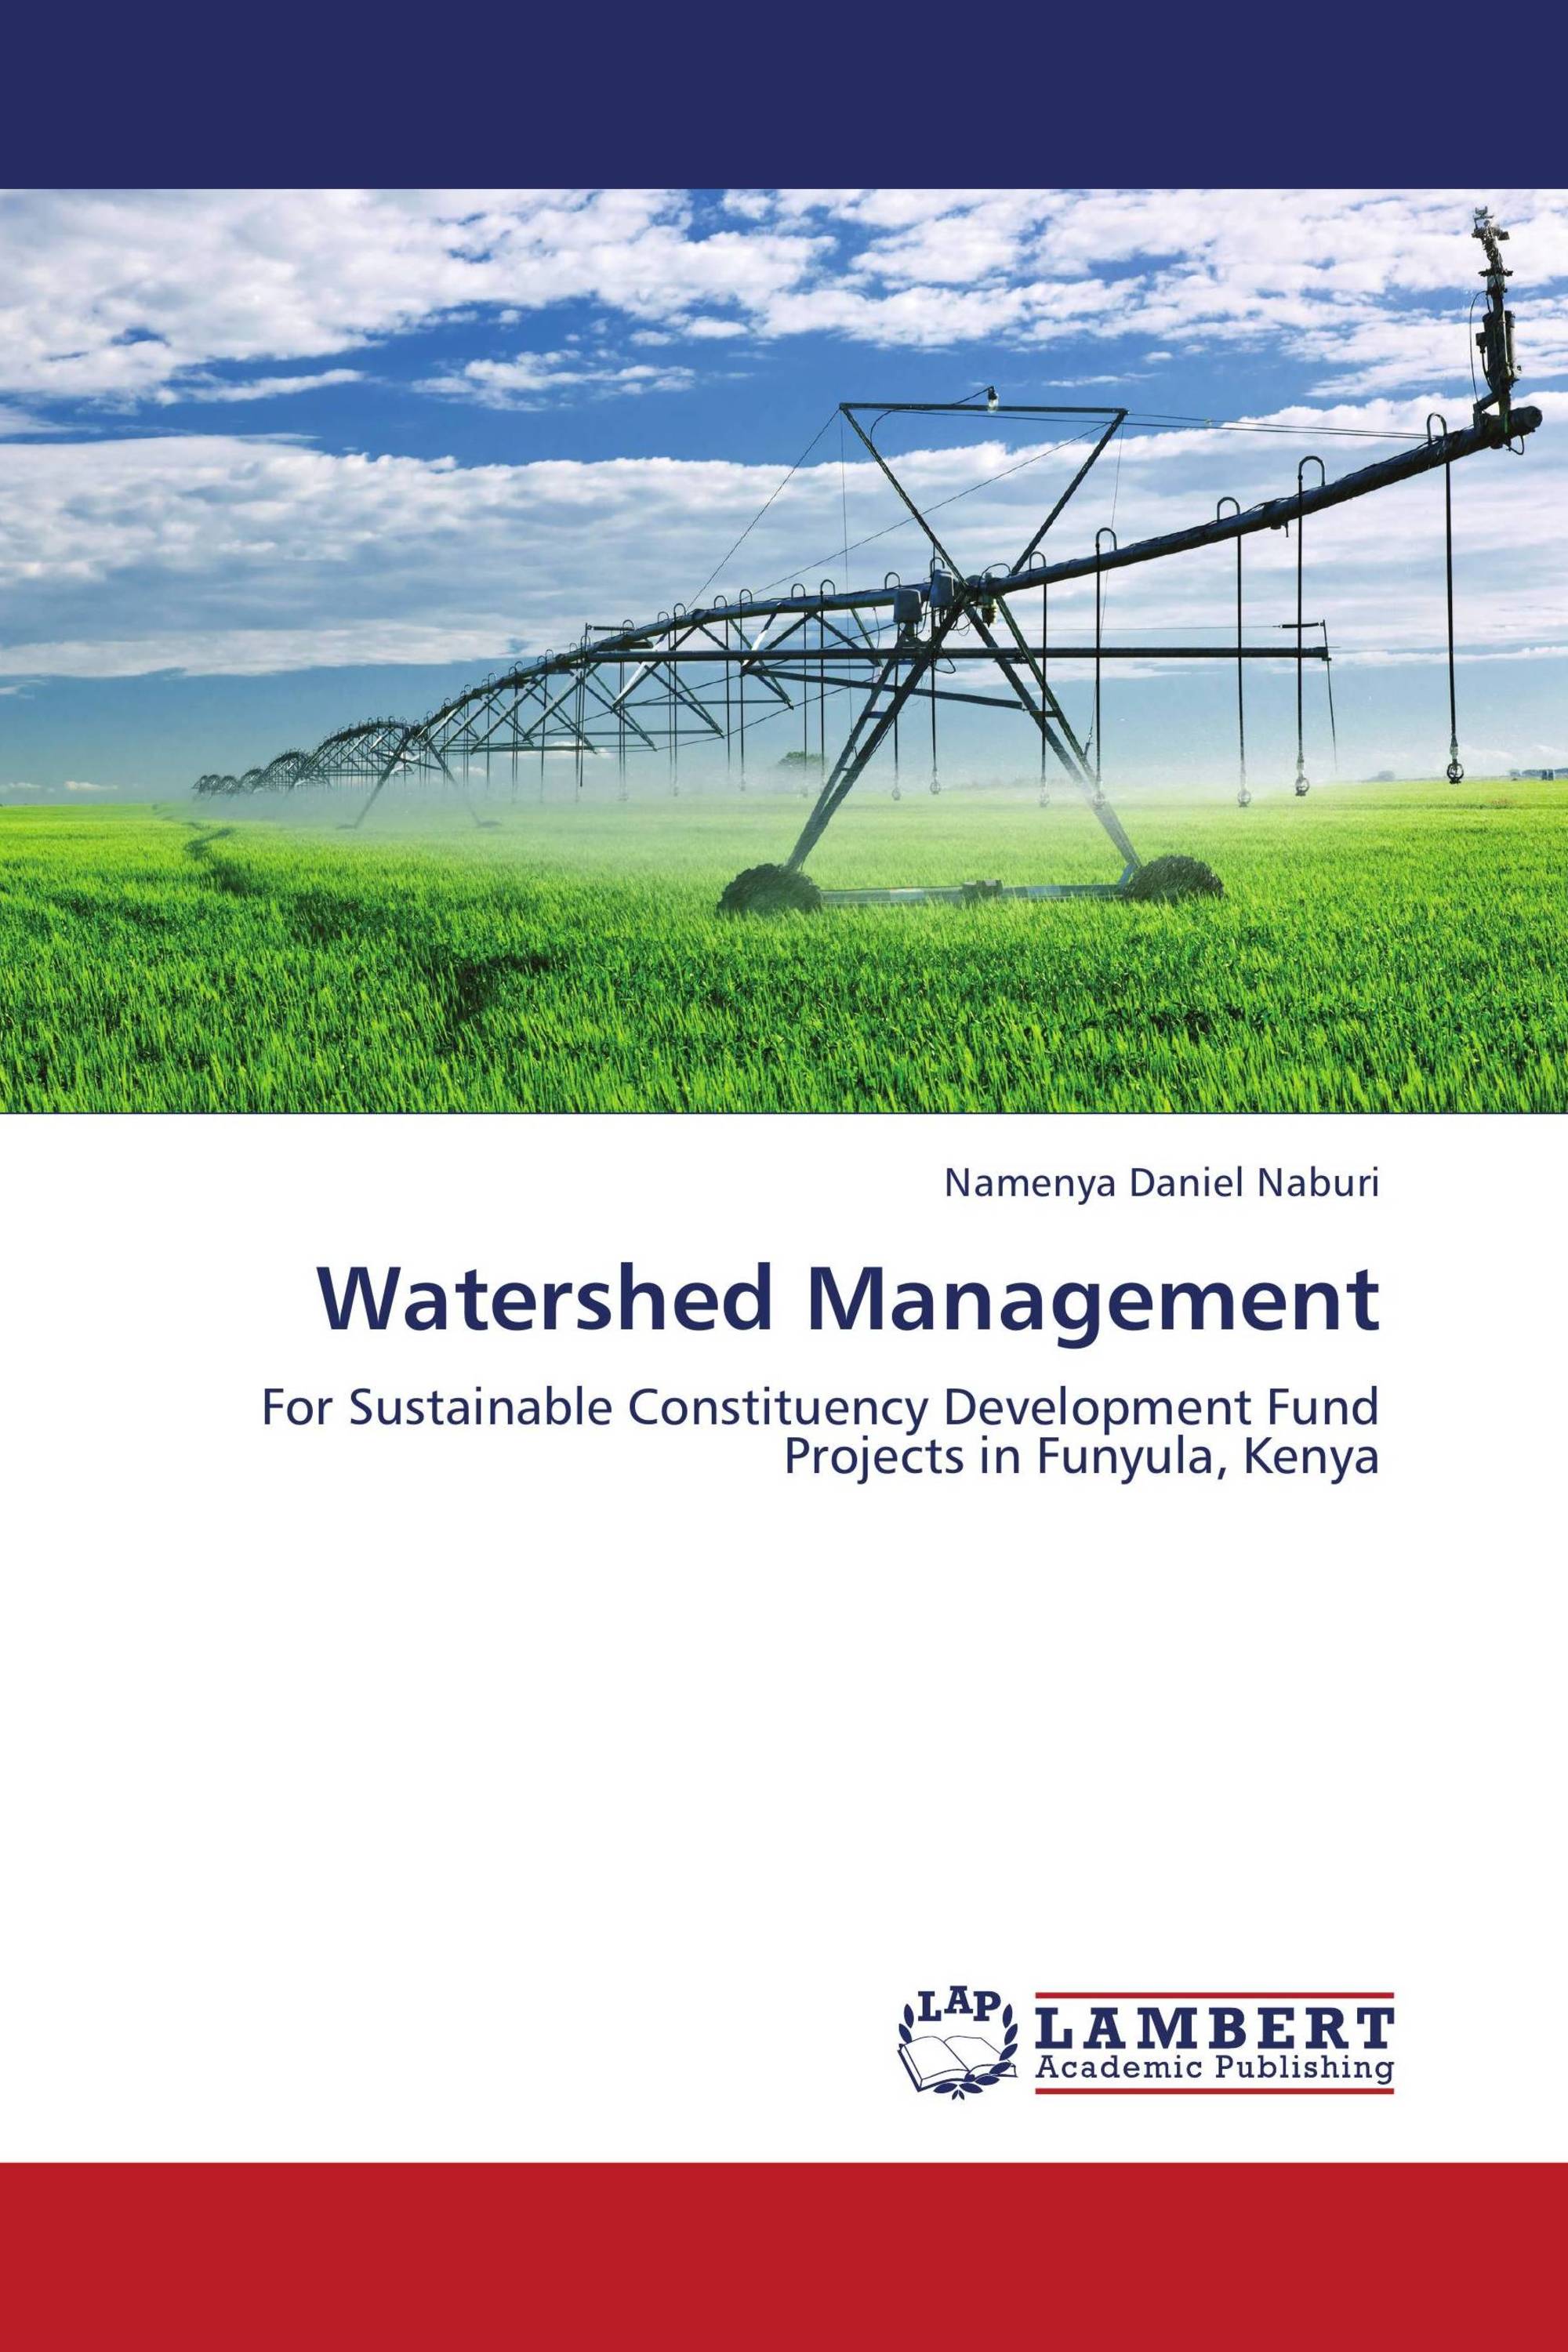 watershed management thesis